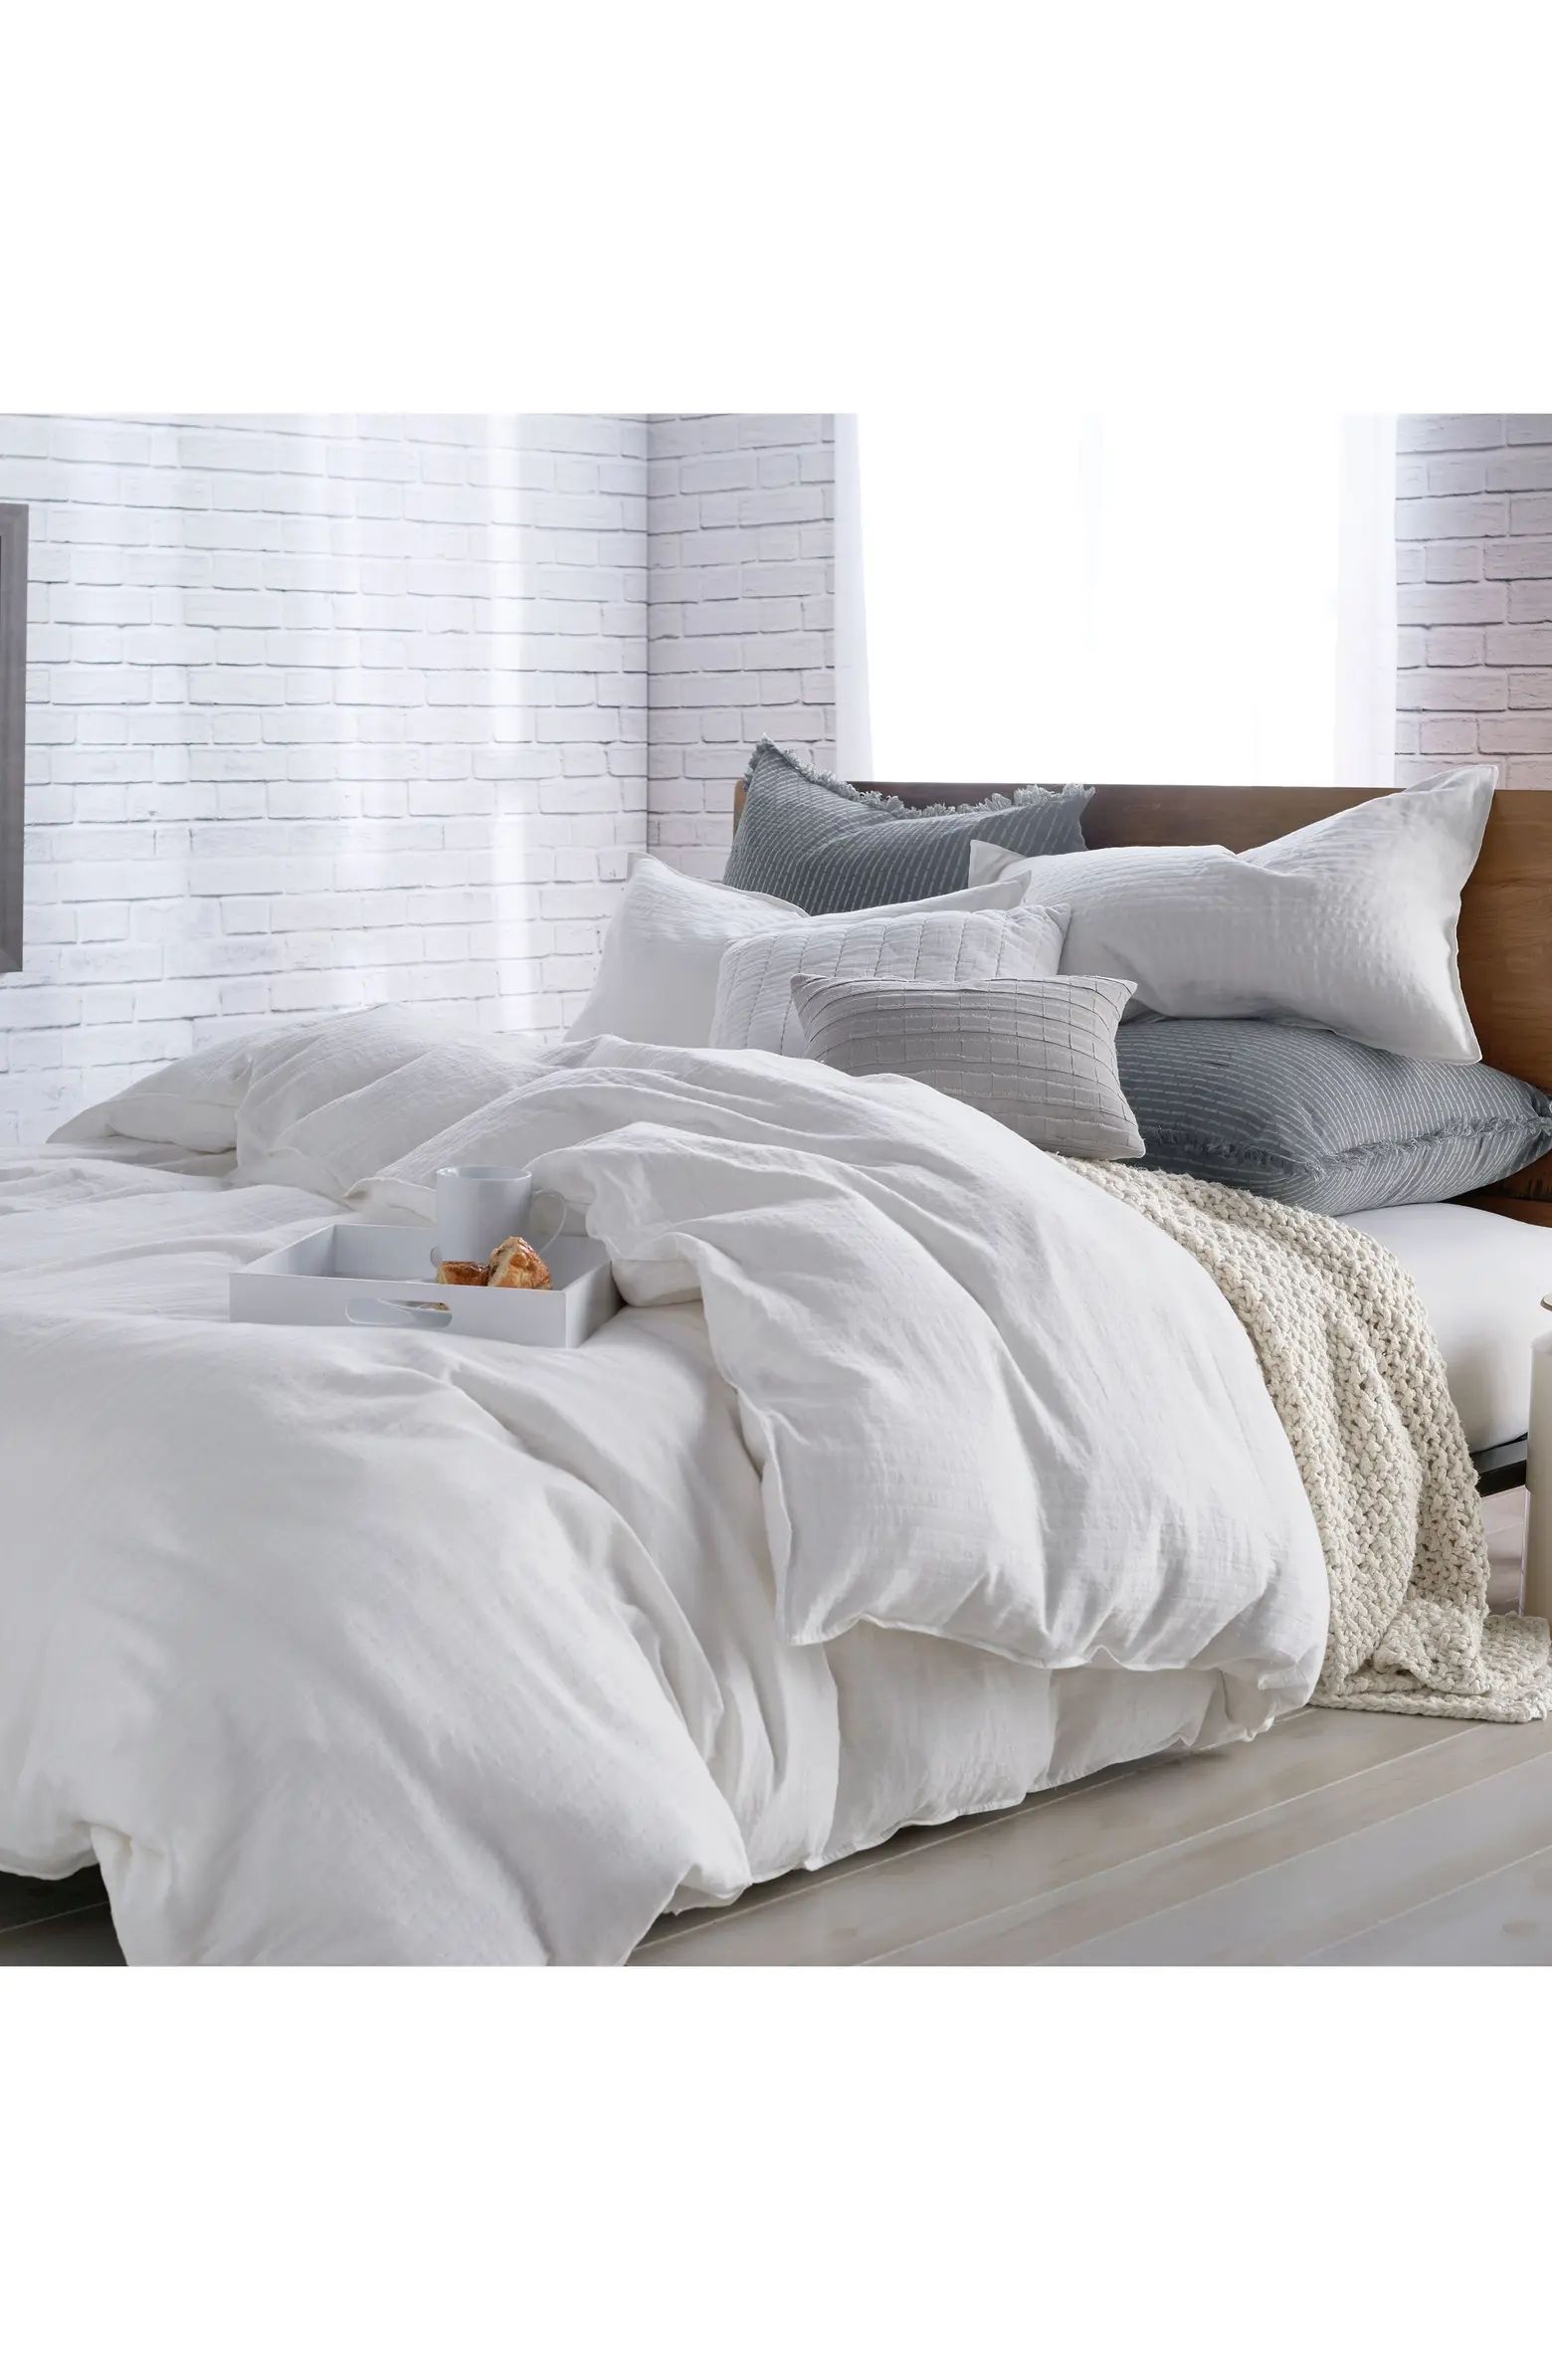 PURE Comfy White Duvet Cover | Nordstrom